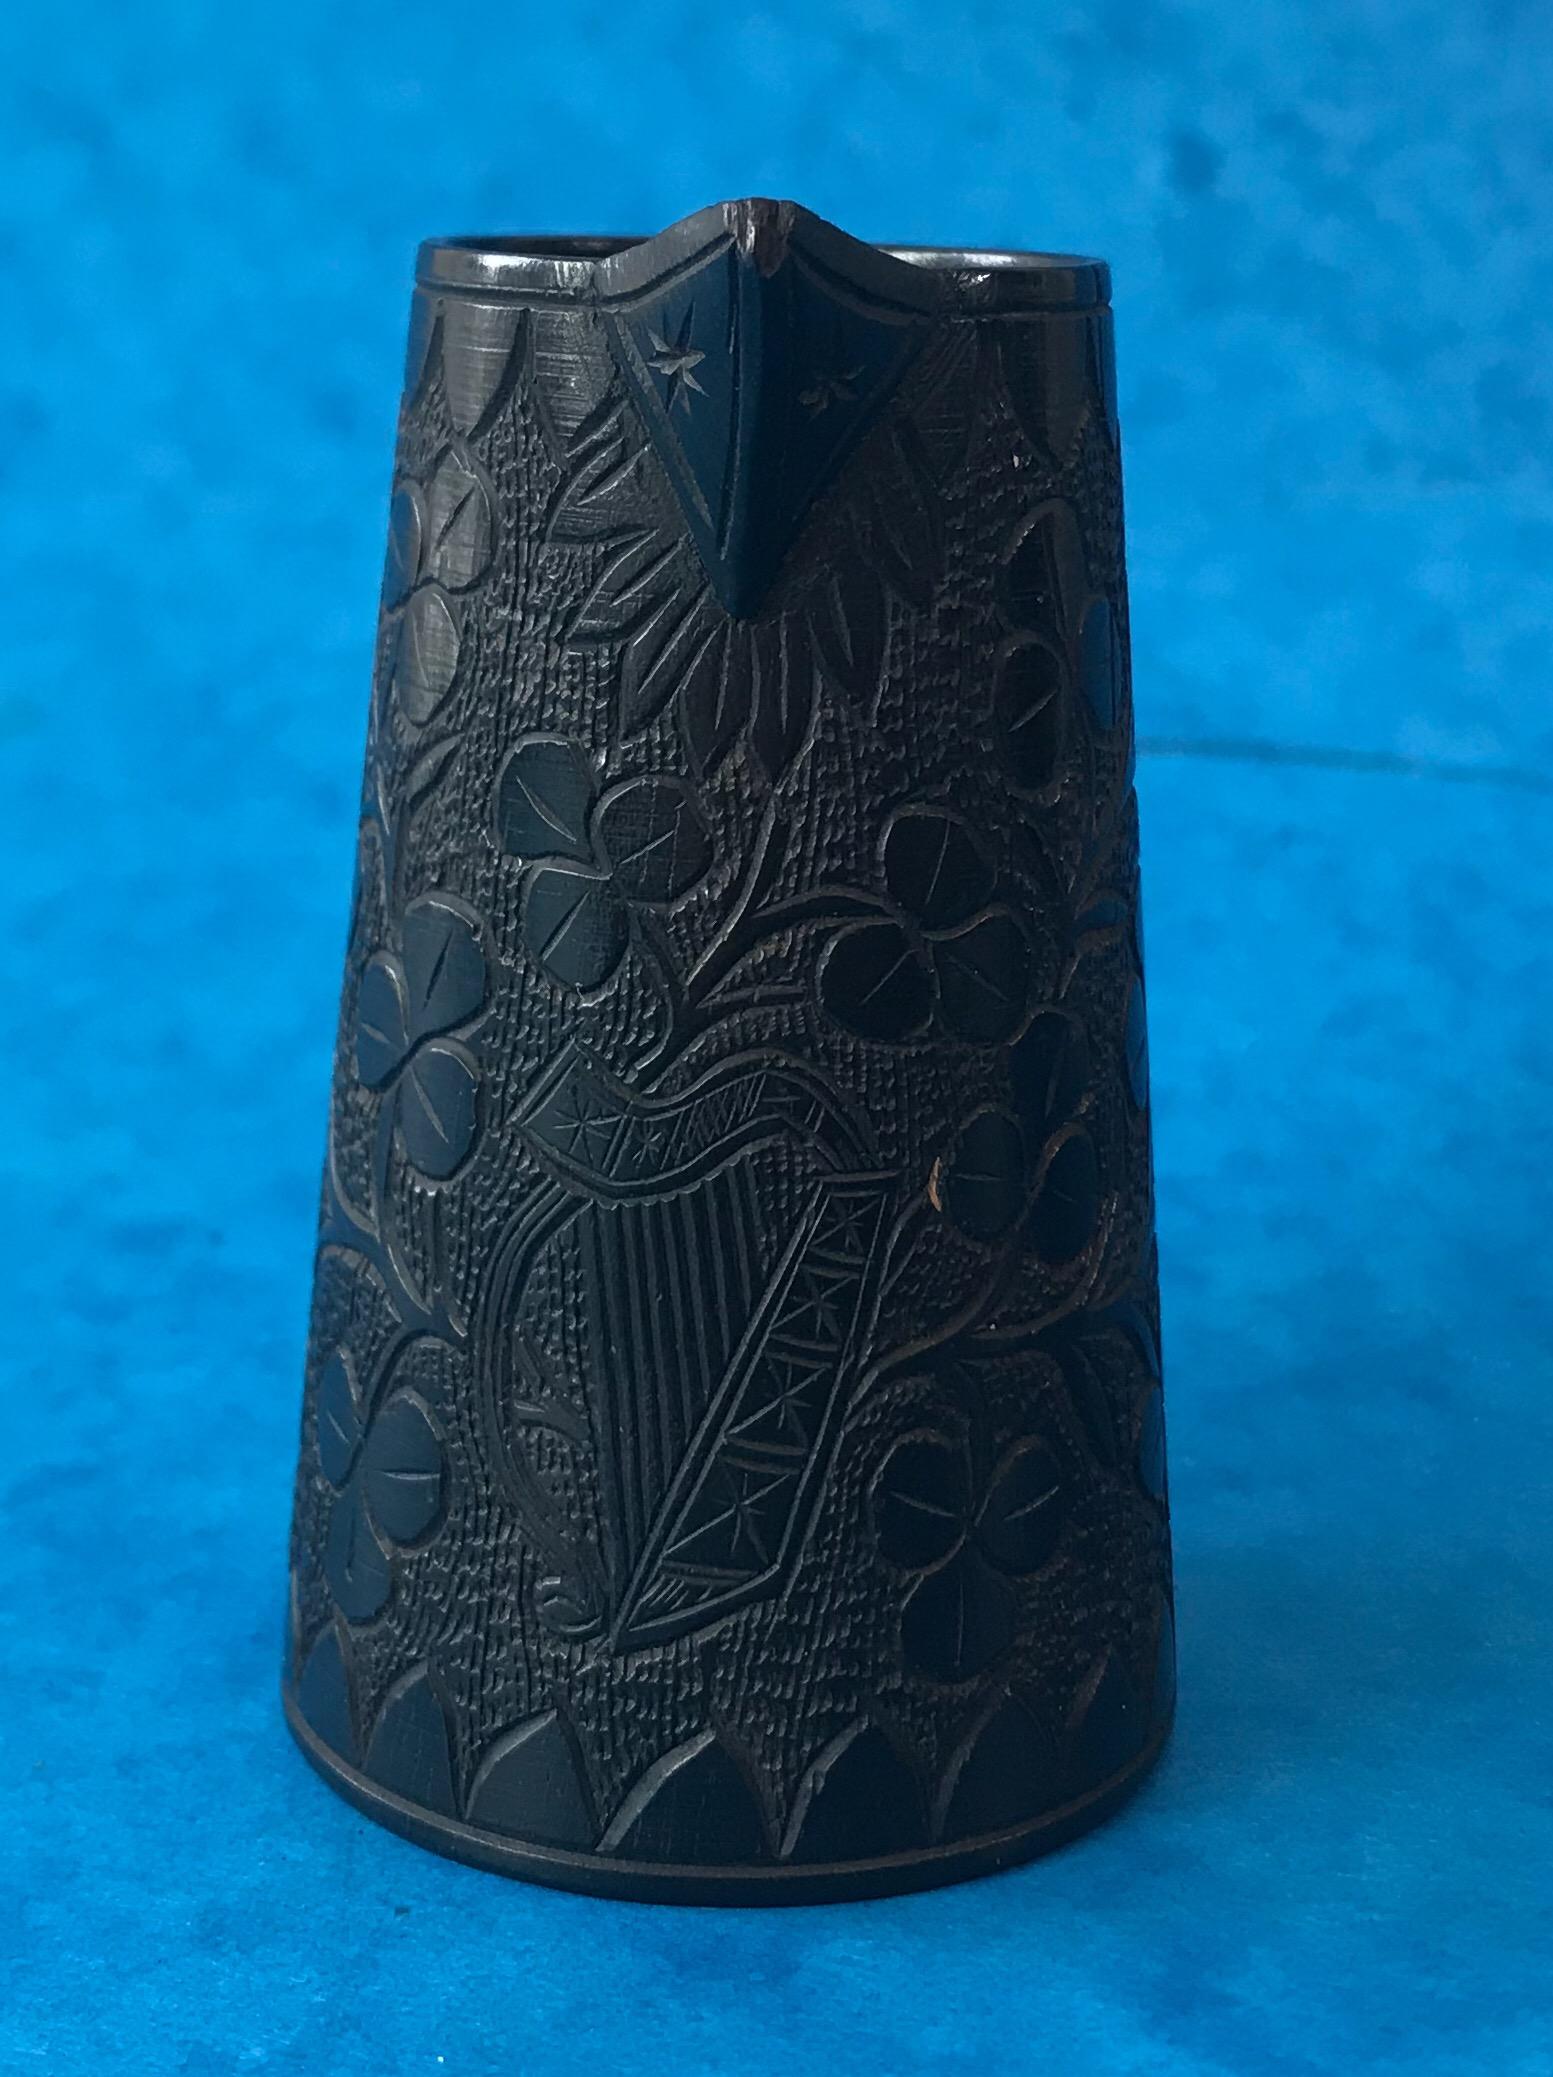 A miniature Killarney ware jug, the jug is Irish and dates back to 1870. It’s made of bog oak it has wonderful patterned leafs and a harp around the jug, it’s in superb condition.
The jug measures 5 by 4.5 and stands 8 cm high.